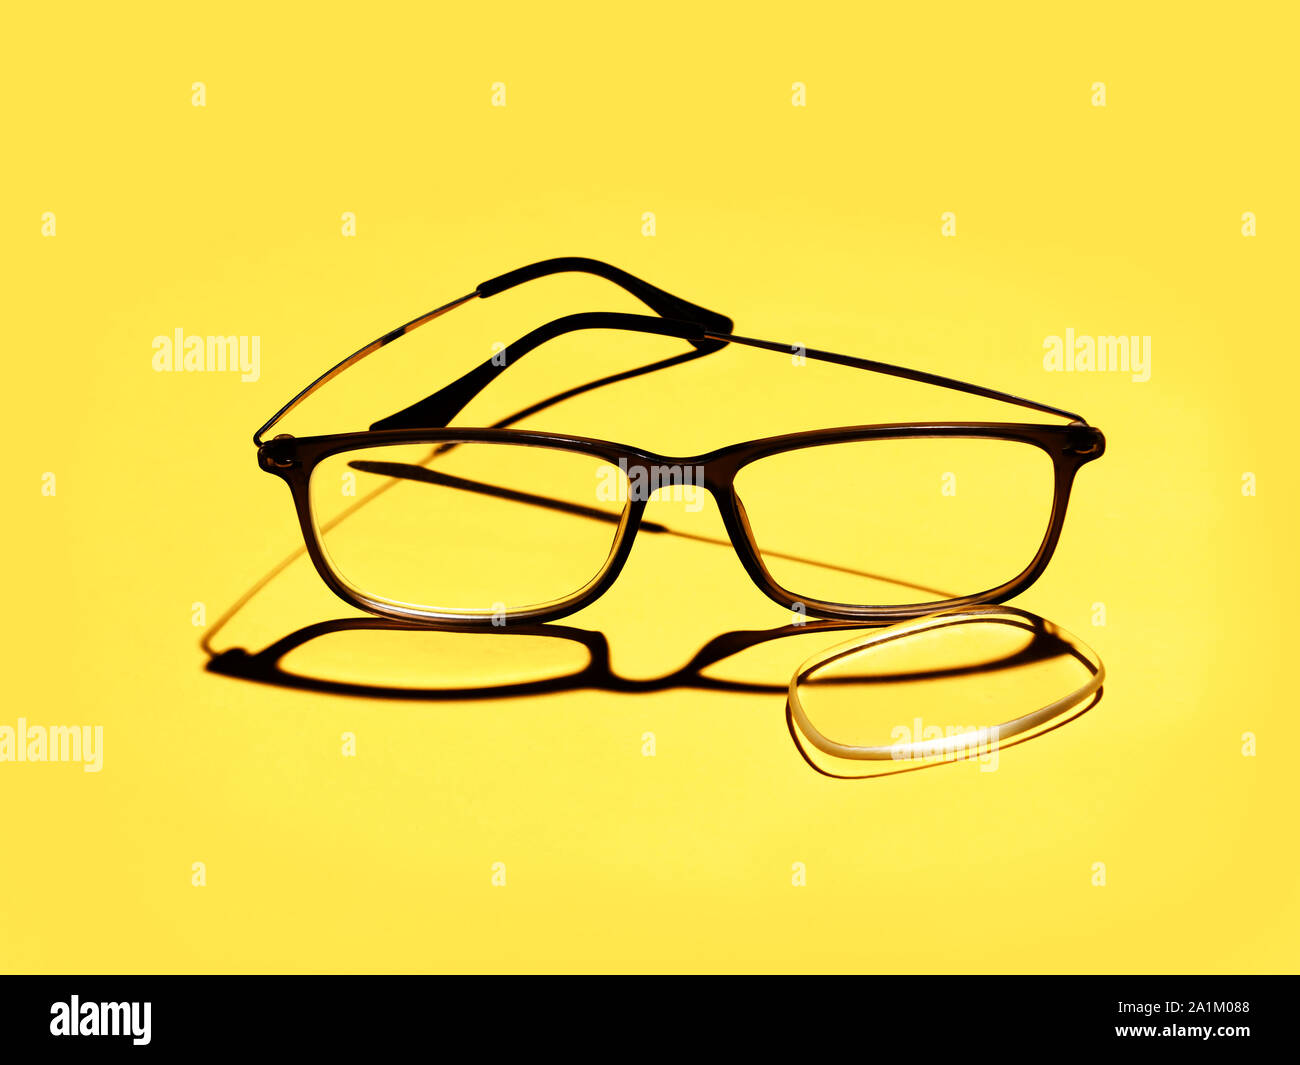 Broken glasses, eyeglasses, lens fallen out on yellow background for copyspace. Optical health or eyewear. Stock Photo